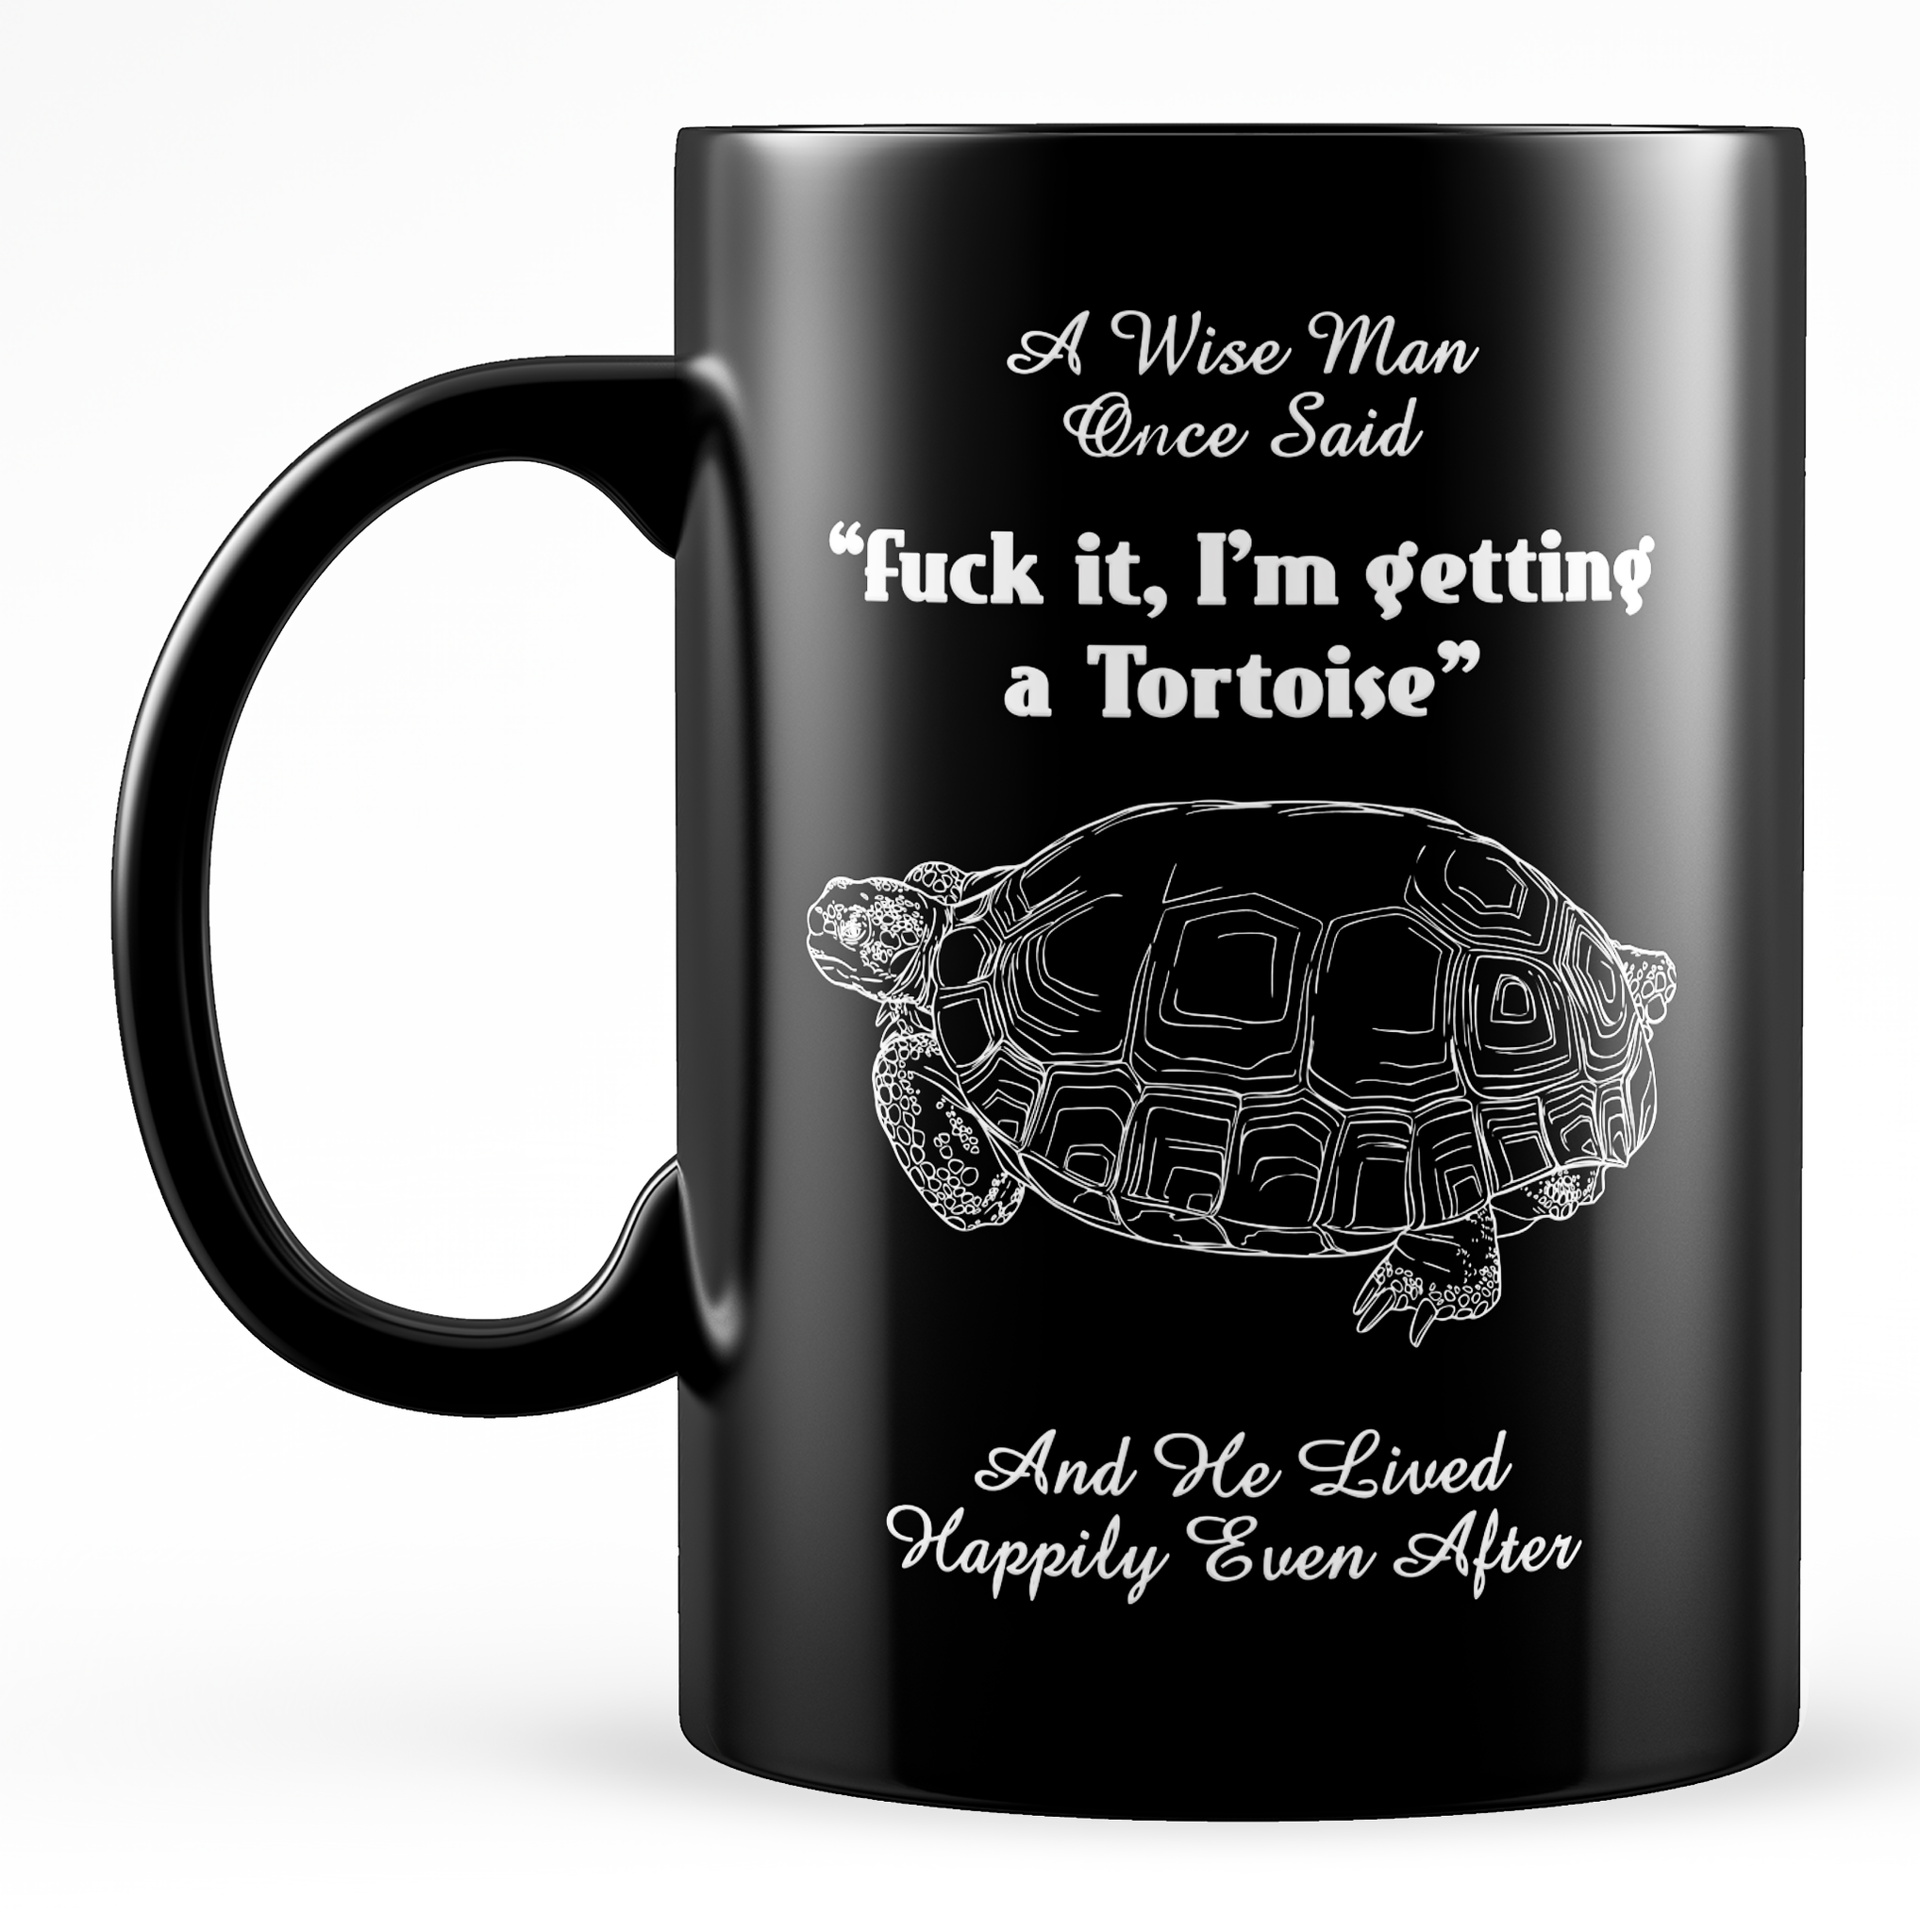 Skitongifts Funny Ceramic Coffee Mug For Birthday, Mother's Day, Father's Day, Christmas TK271121_ Funny Tortoise Gifts For Men A Wise Man Once Said